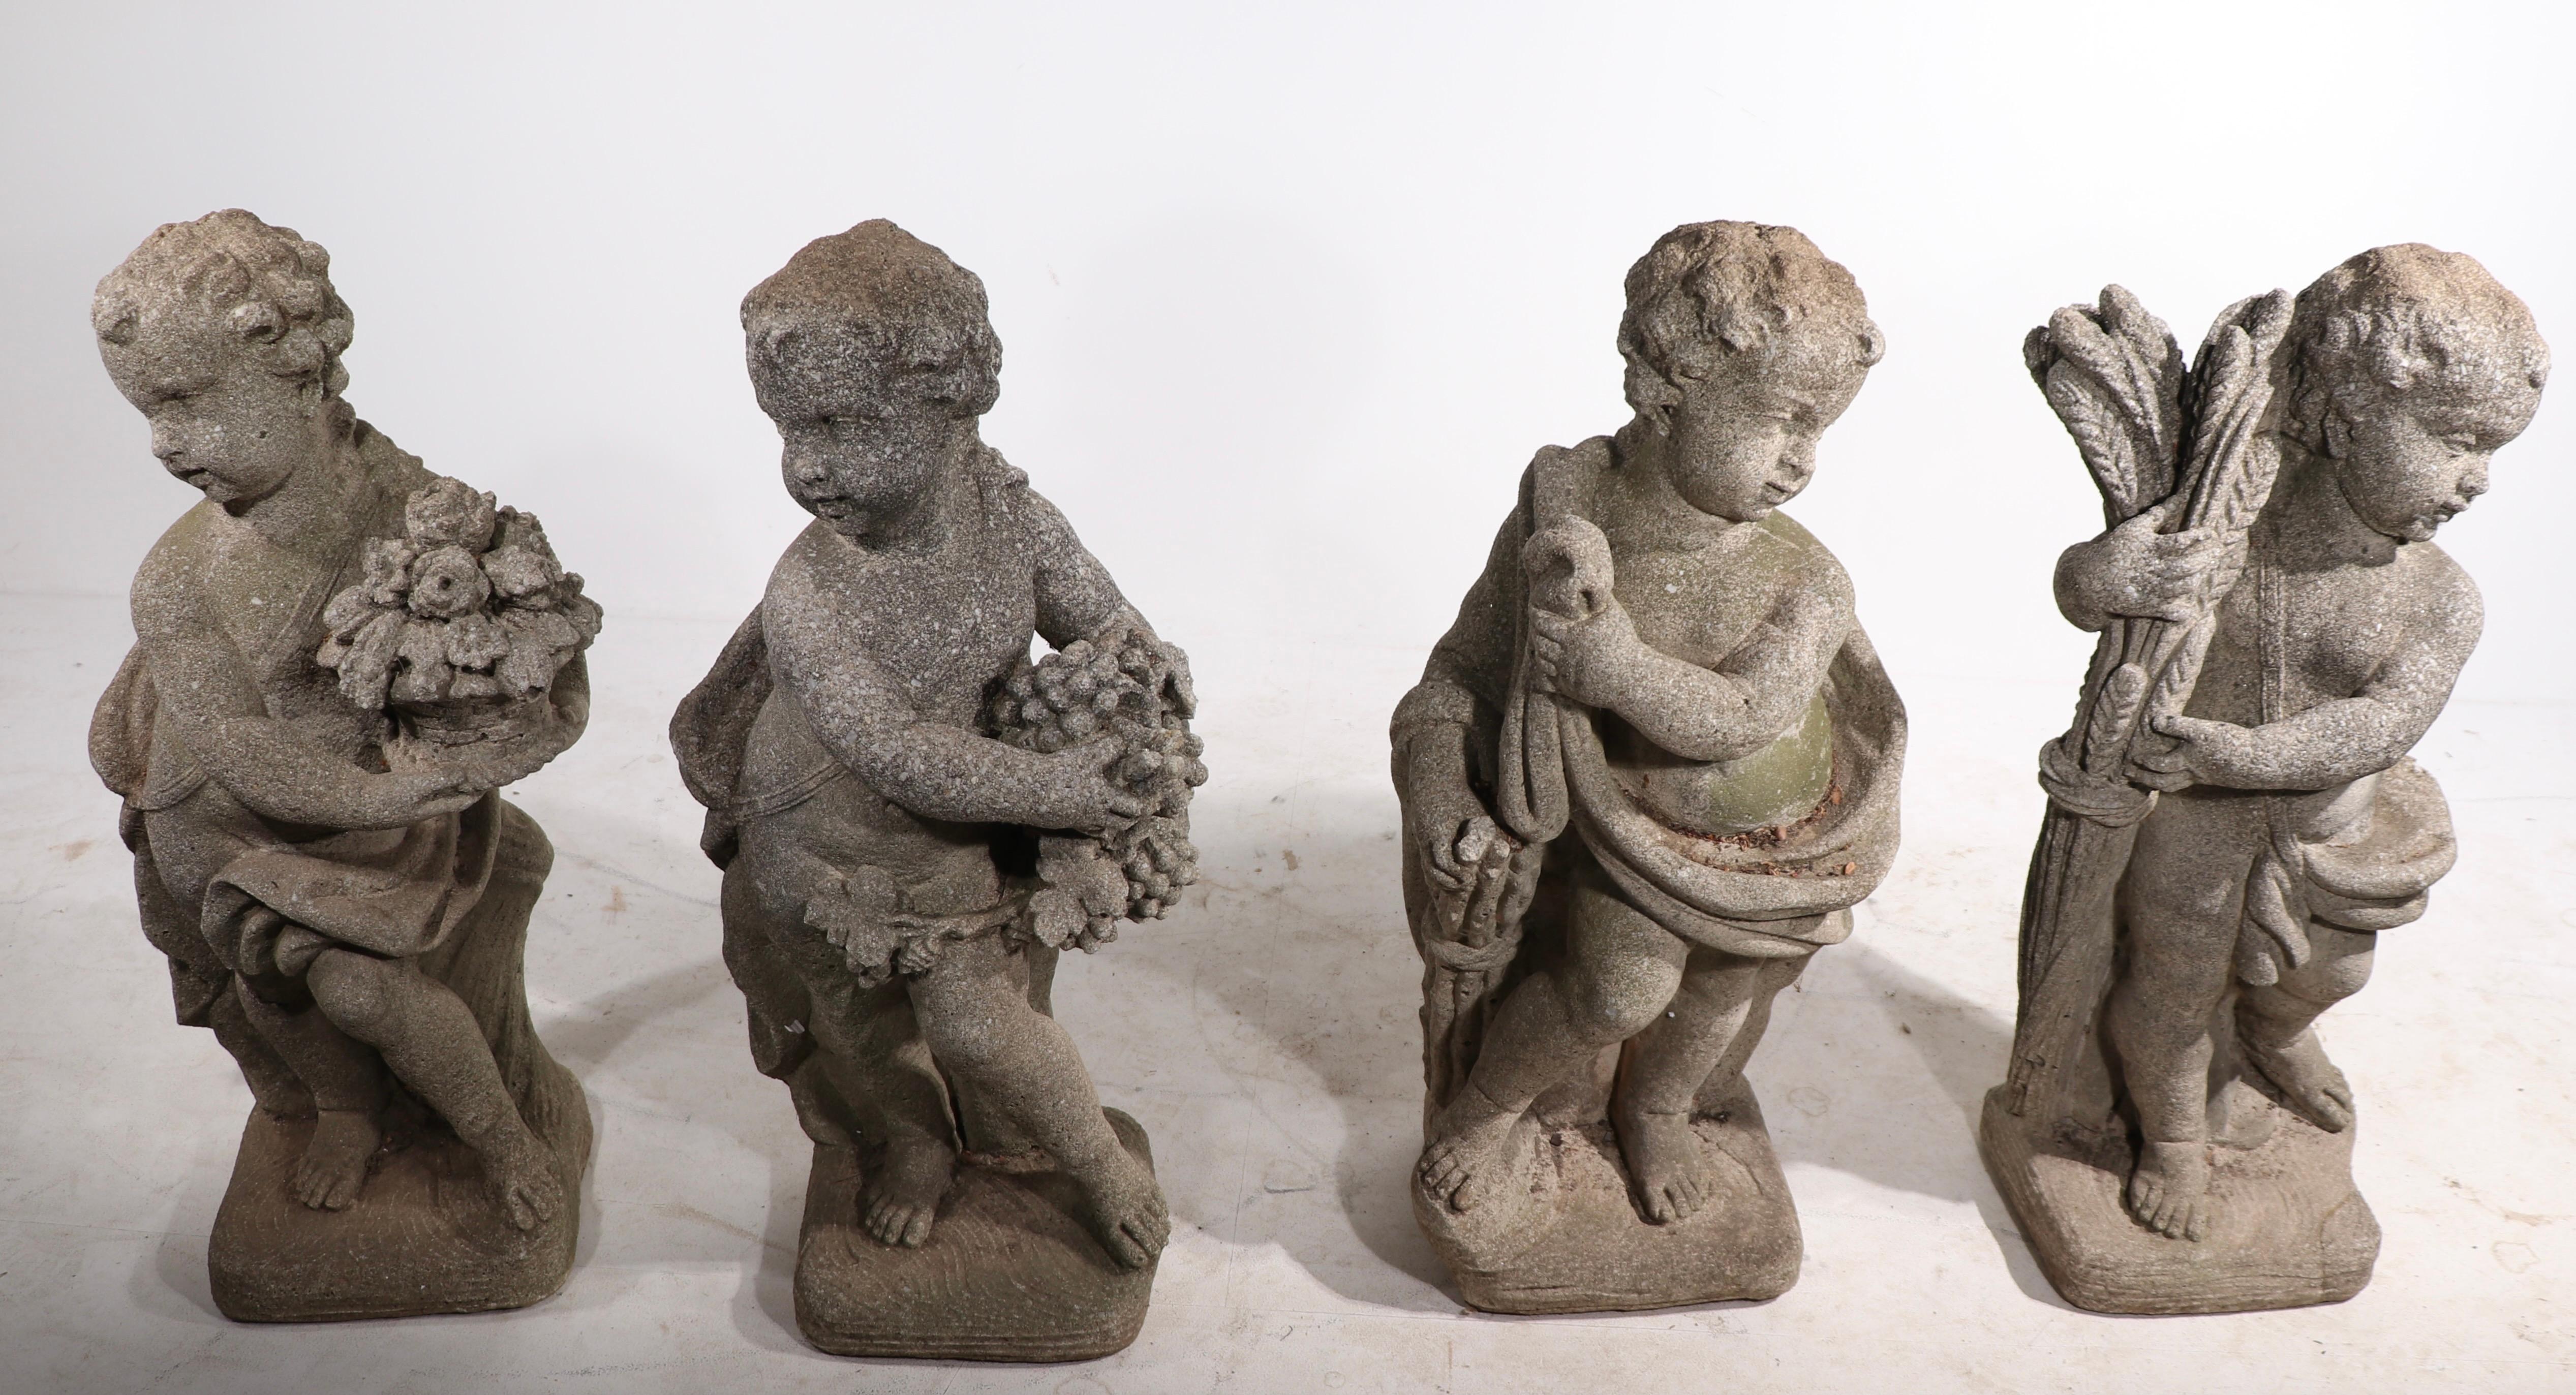 Second payment for Four Seasons Cast Stone Garden Statues 2